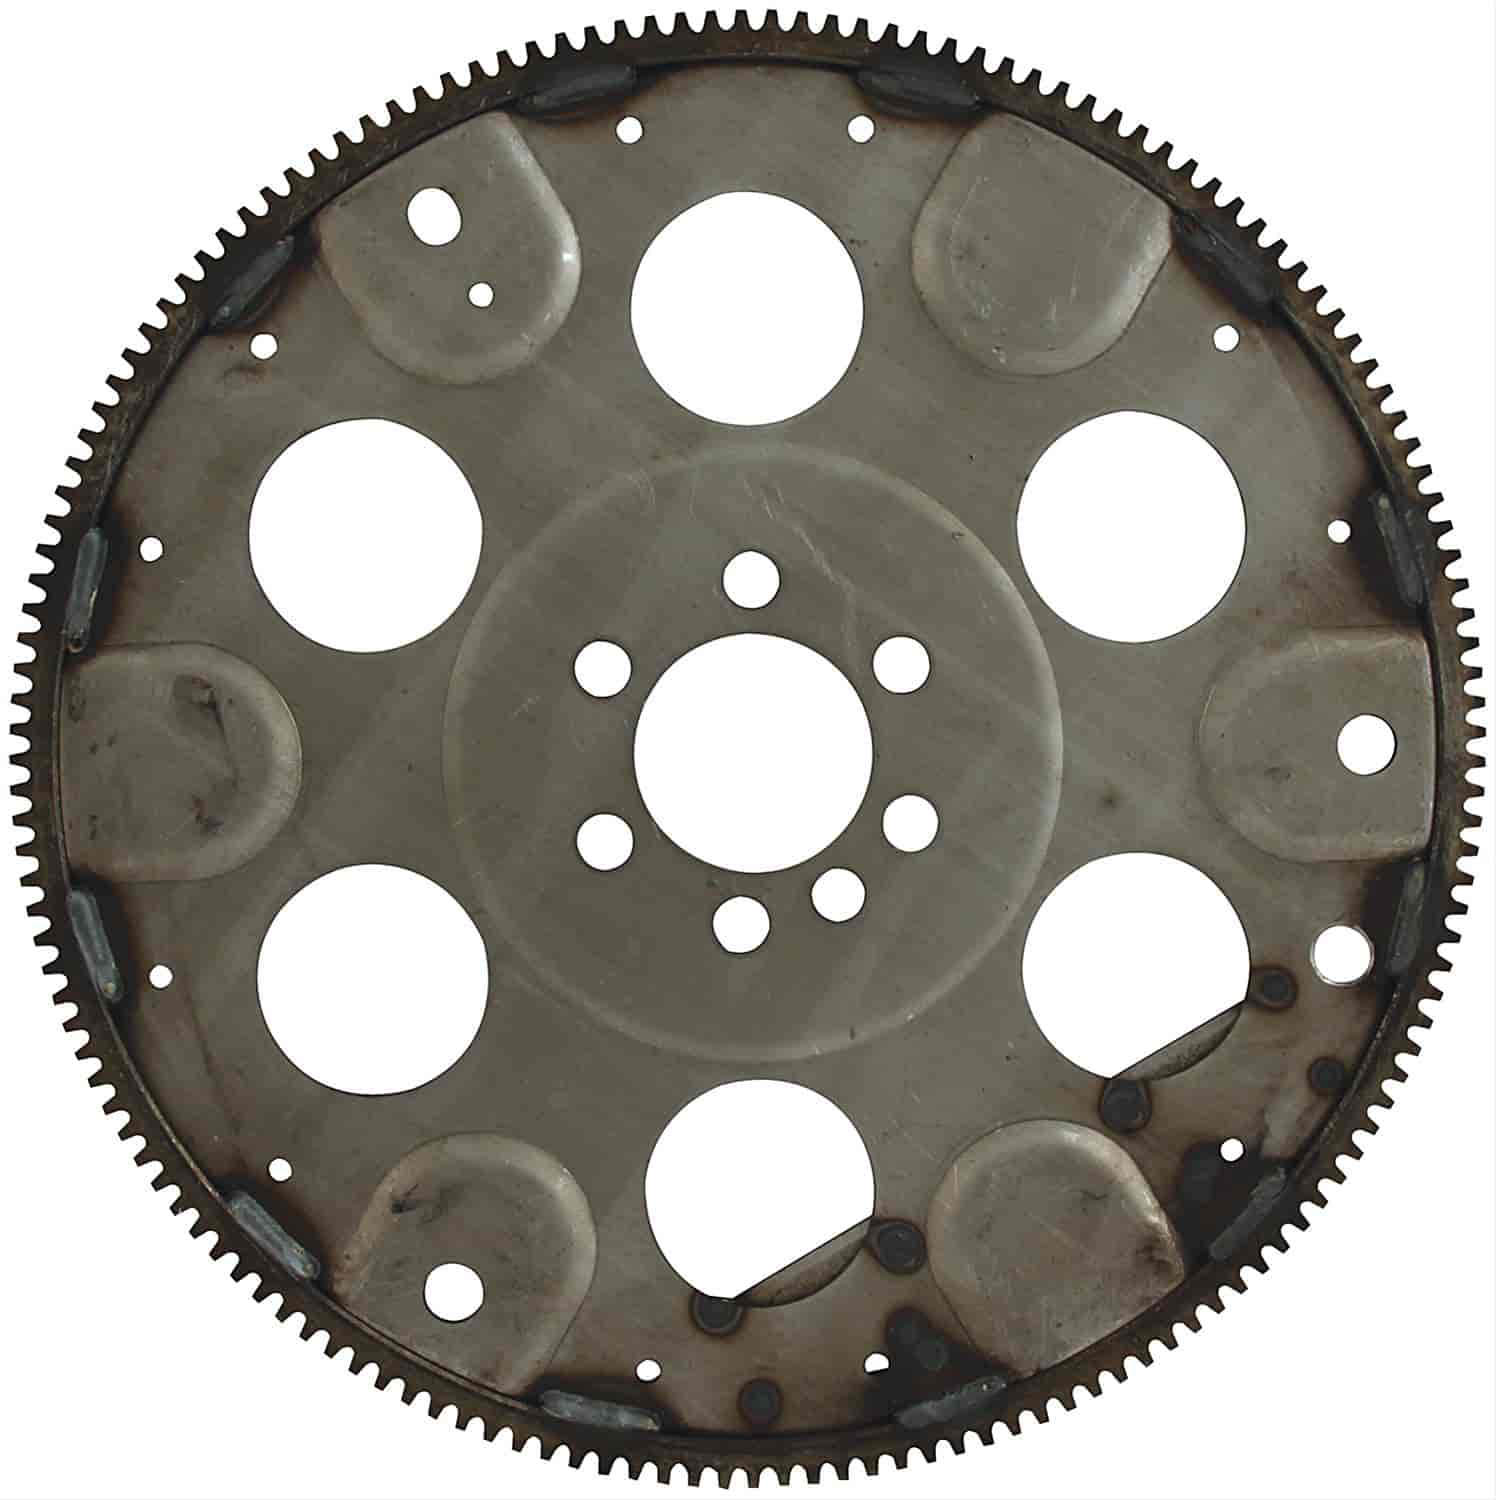 Stock Replacement Flexplate Small Block Chevy (1986-Up)